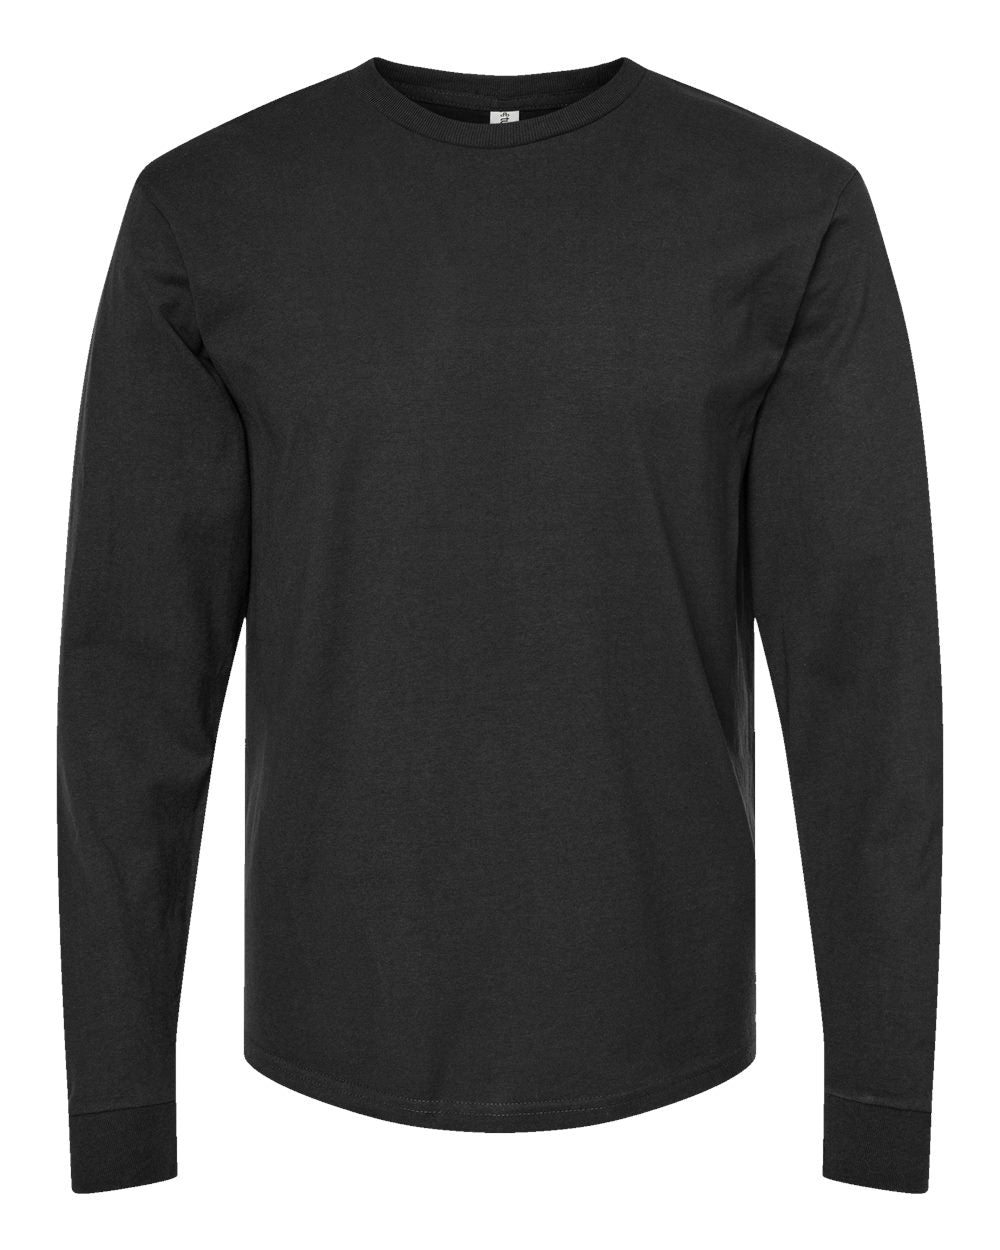 Design your own Long Sleeve Shirt